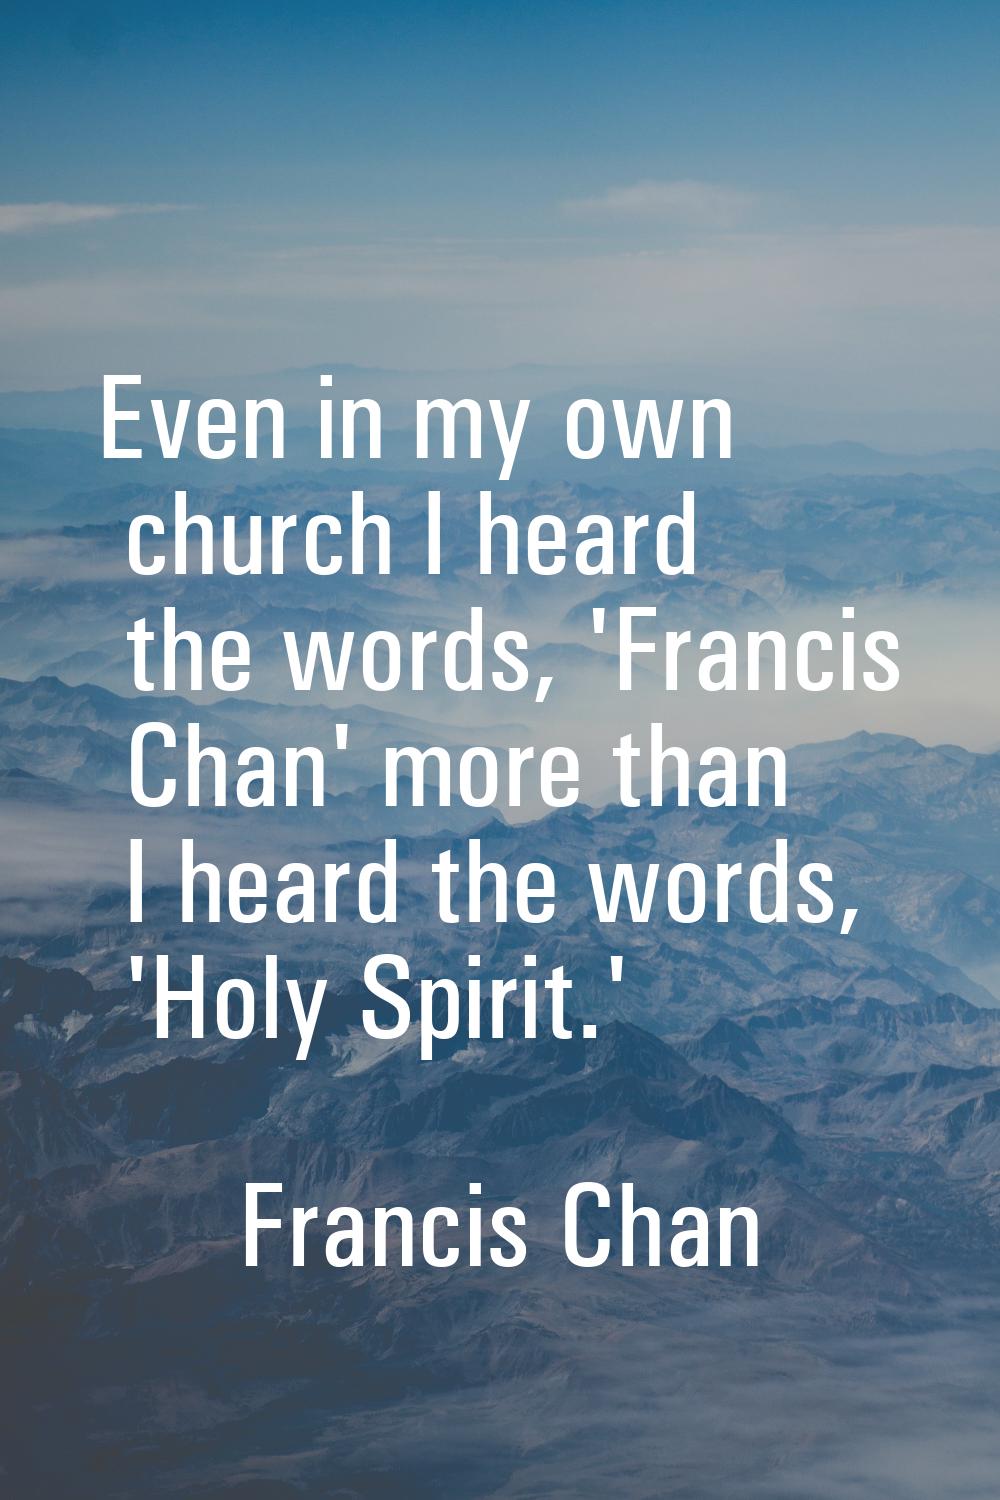 Even in my own church I heard the words, 'Francis Chan' more than I heard the words, 'Holy Spirit.'